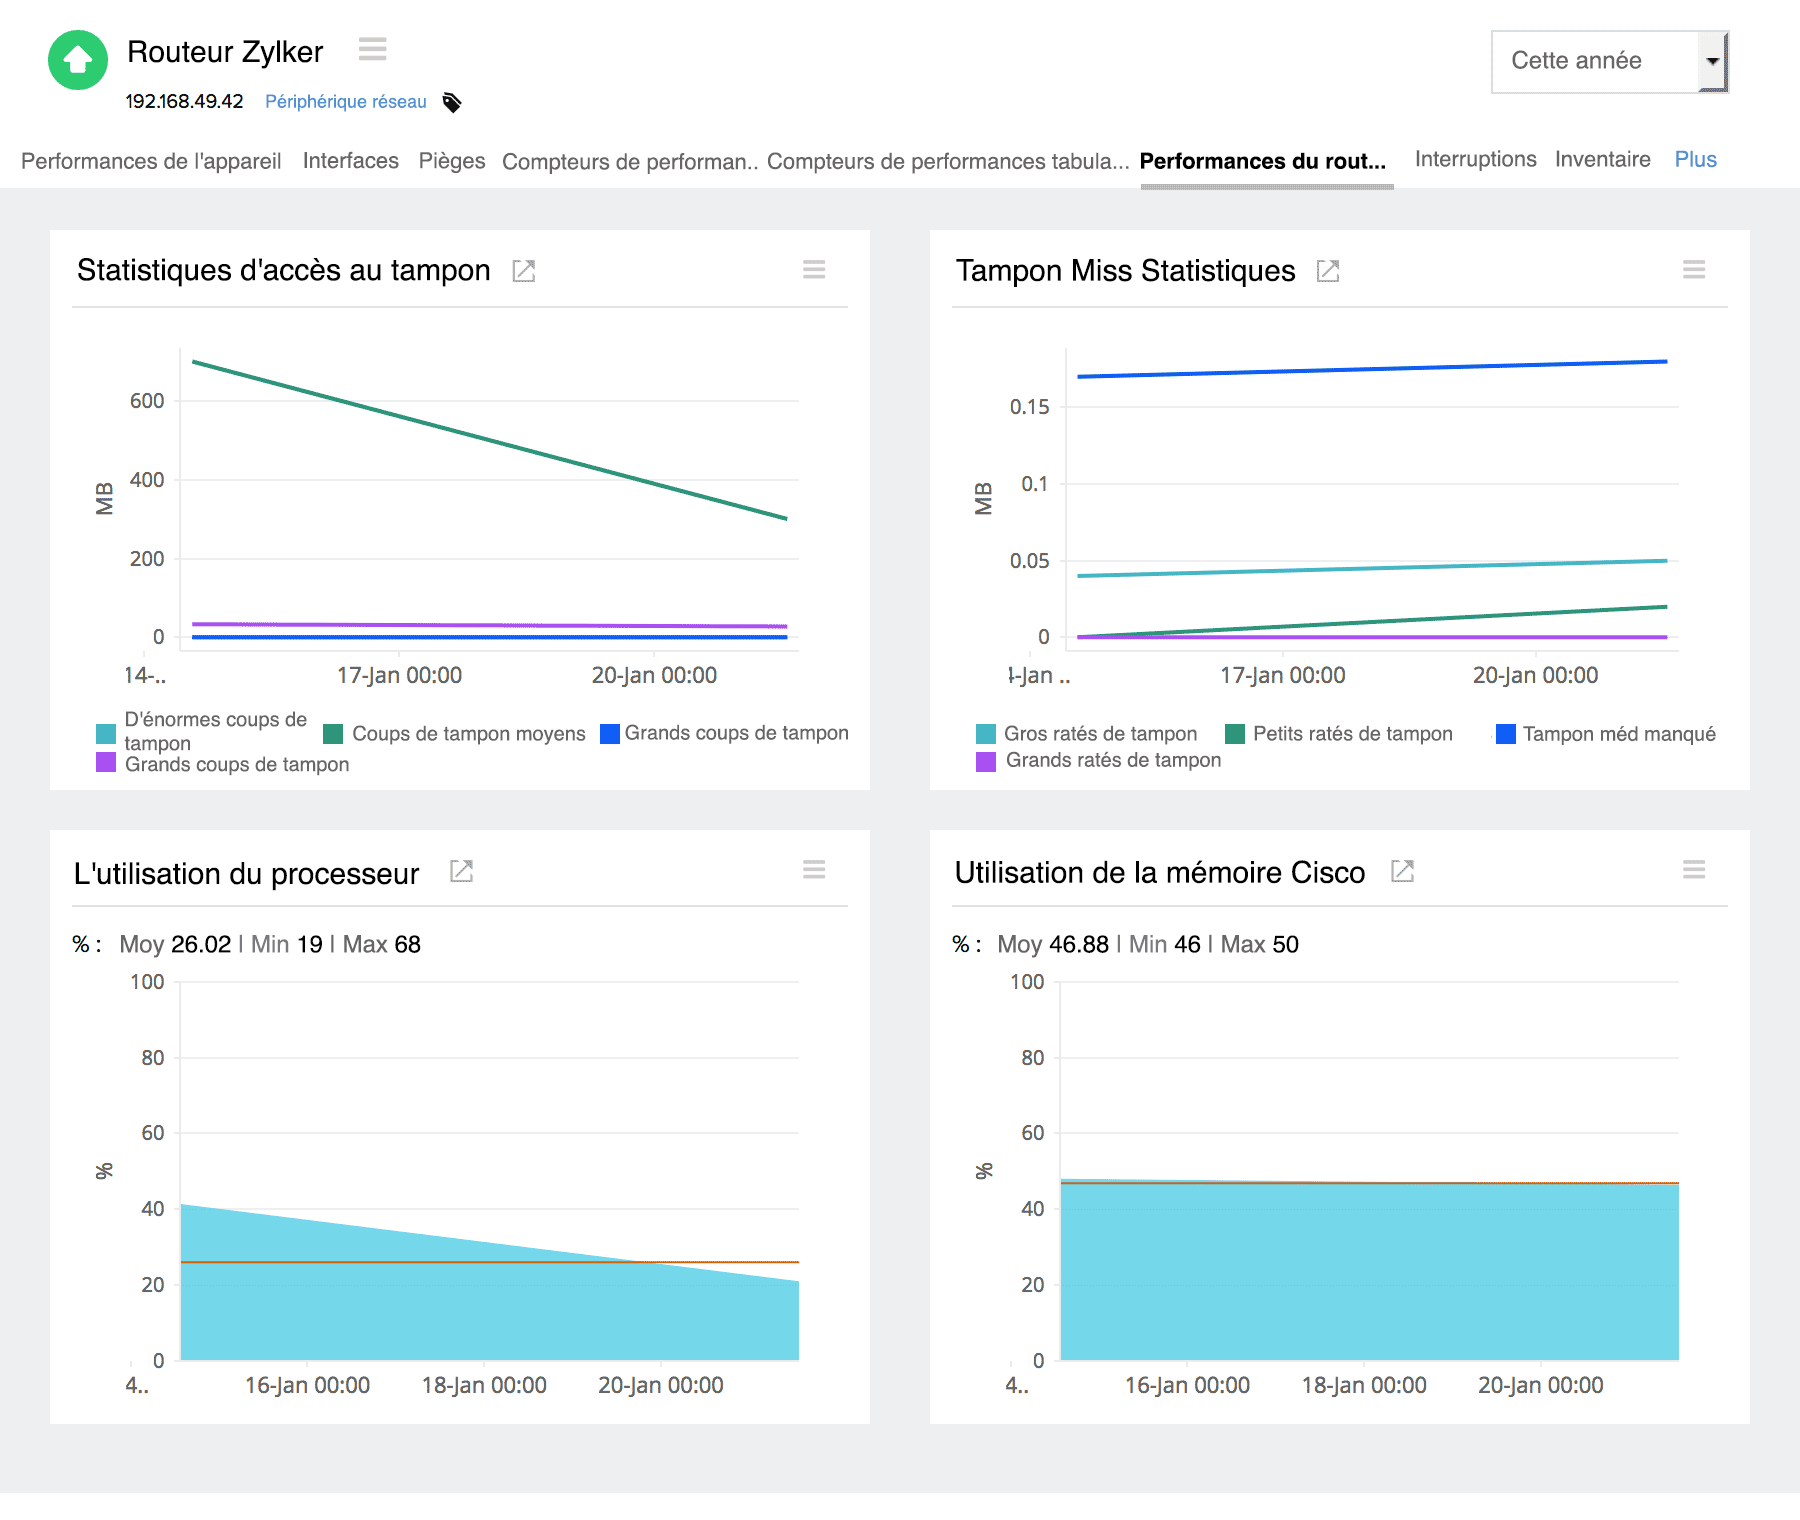 Keep track of your router performance